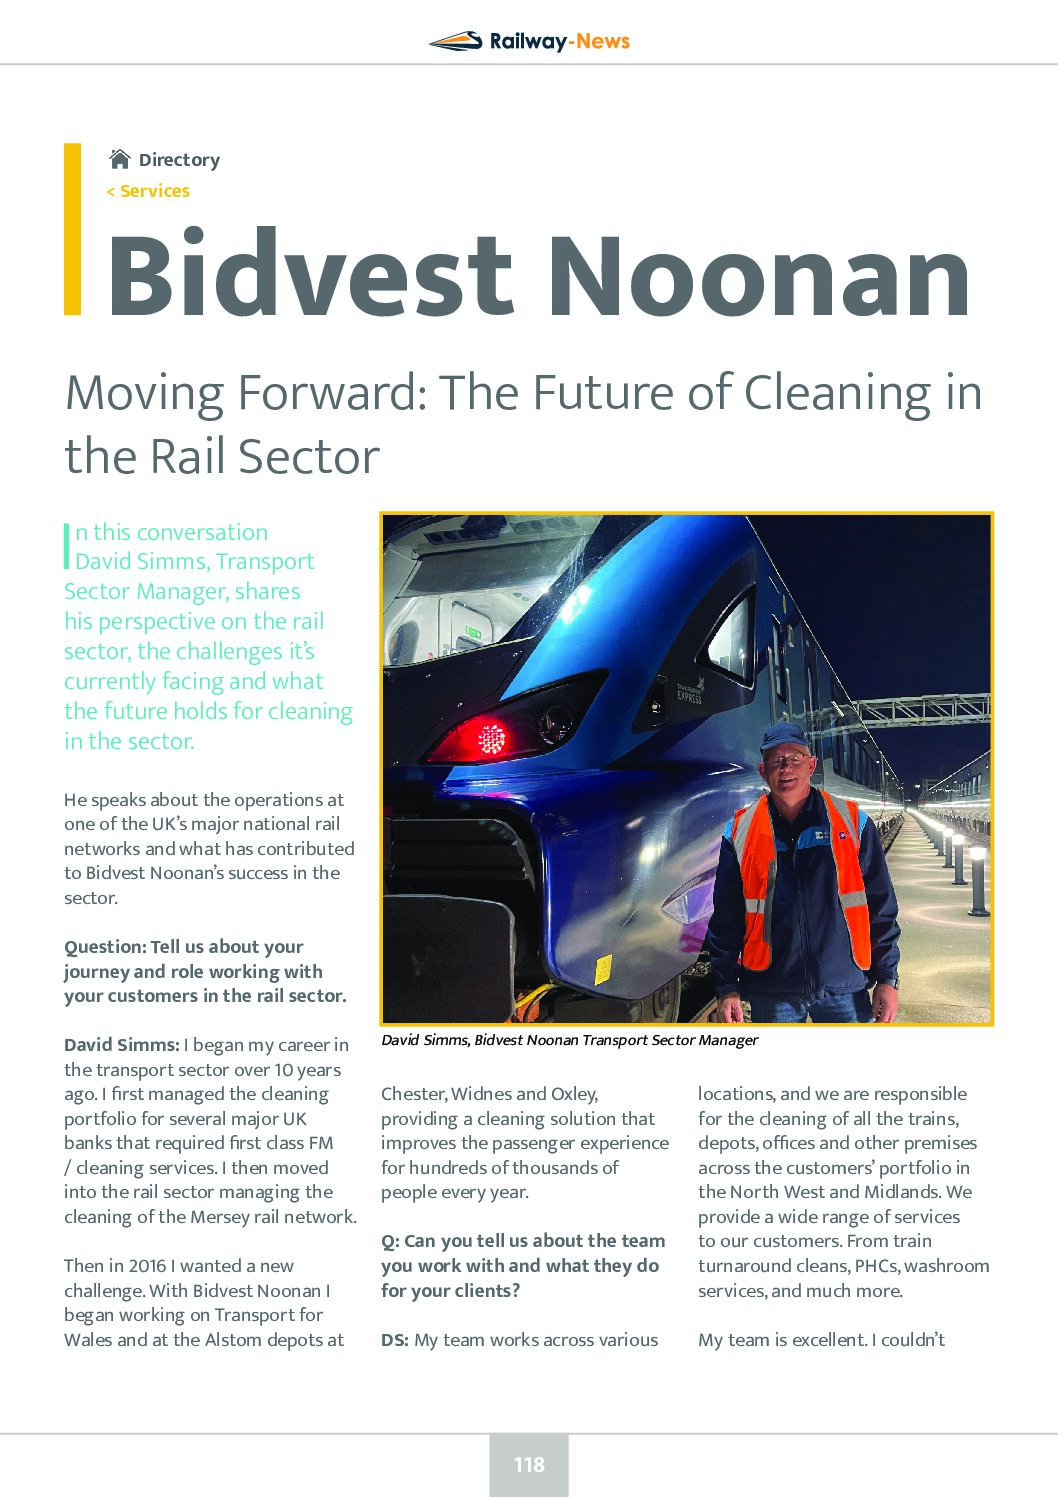 Moving Forward: The Future of Cleaning in the Rail Sector